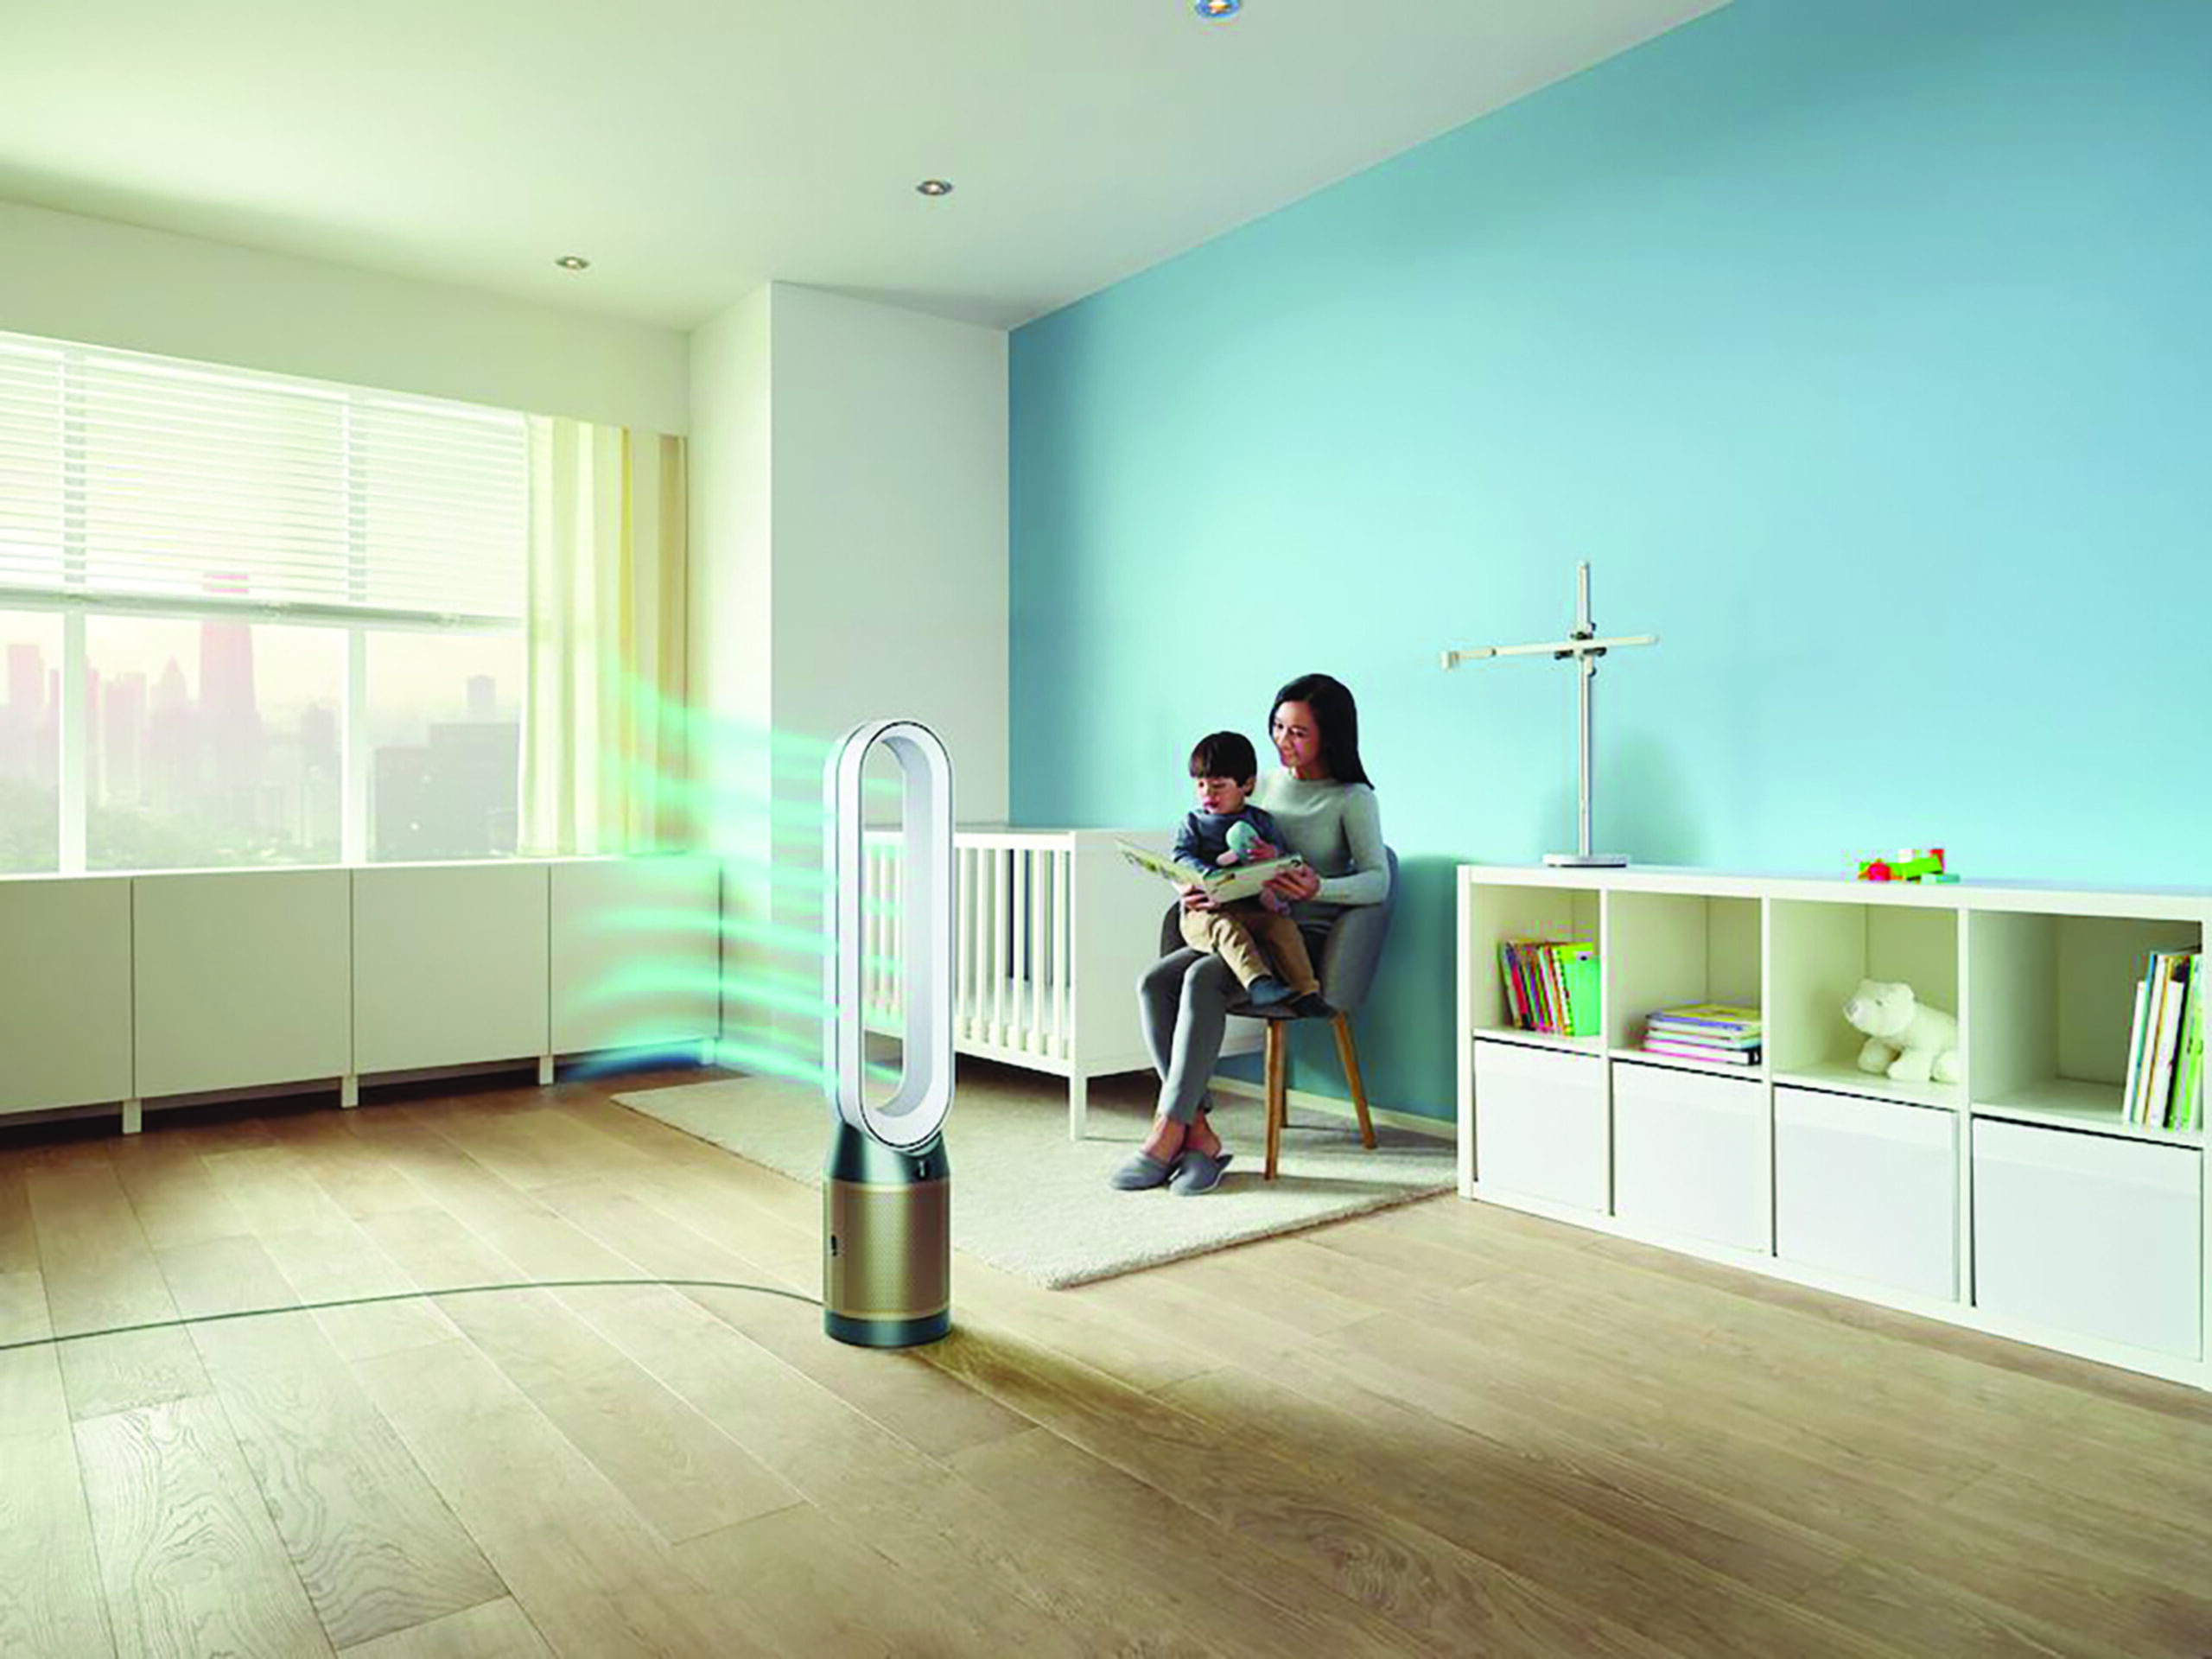 Dyson technologies creating healthier childcare spaces